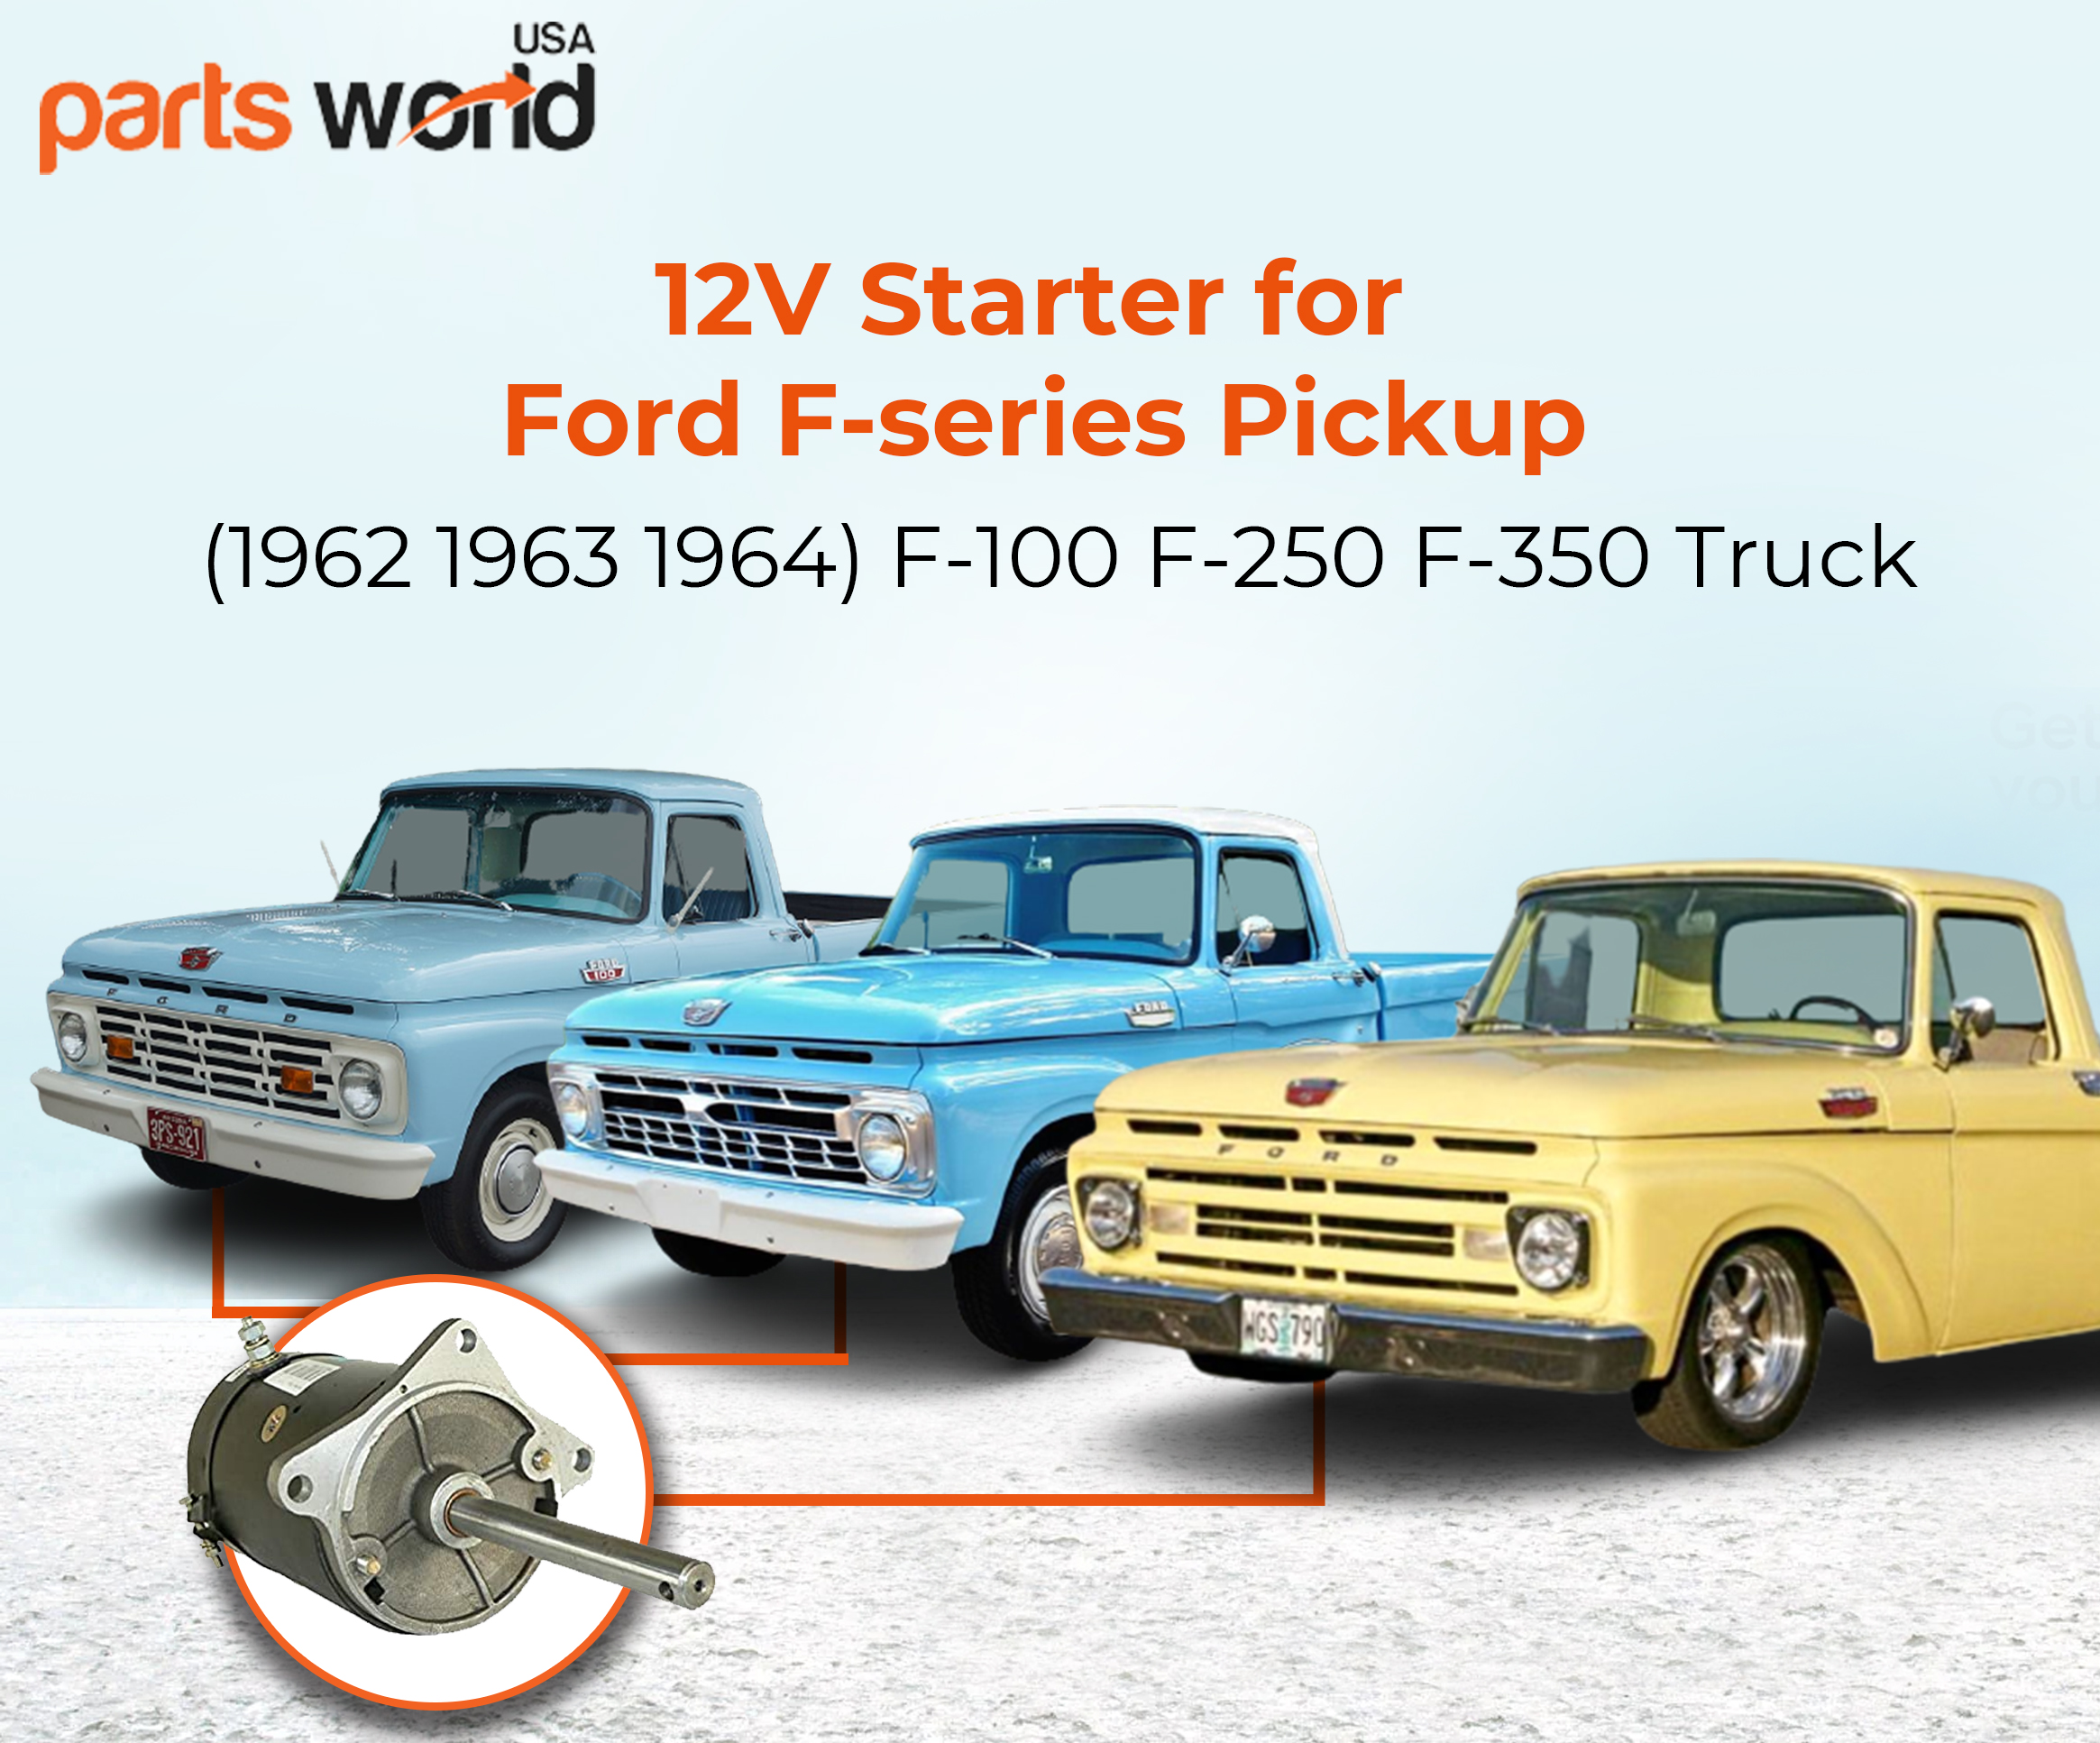 12V Starter for Ford F-series Pickup (1962 1963 1964) F-100 F-250 F-350 Truck C2AF-11001-A, C2AZ-11002-B, C2SF-11001-A, C2SZ-11002-A, C3AF-11001-A, C3NF-11002-A, C3SF-11001-A, FAY-11001-A